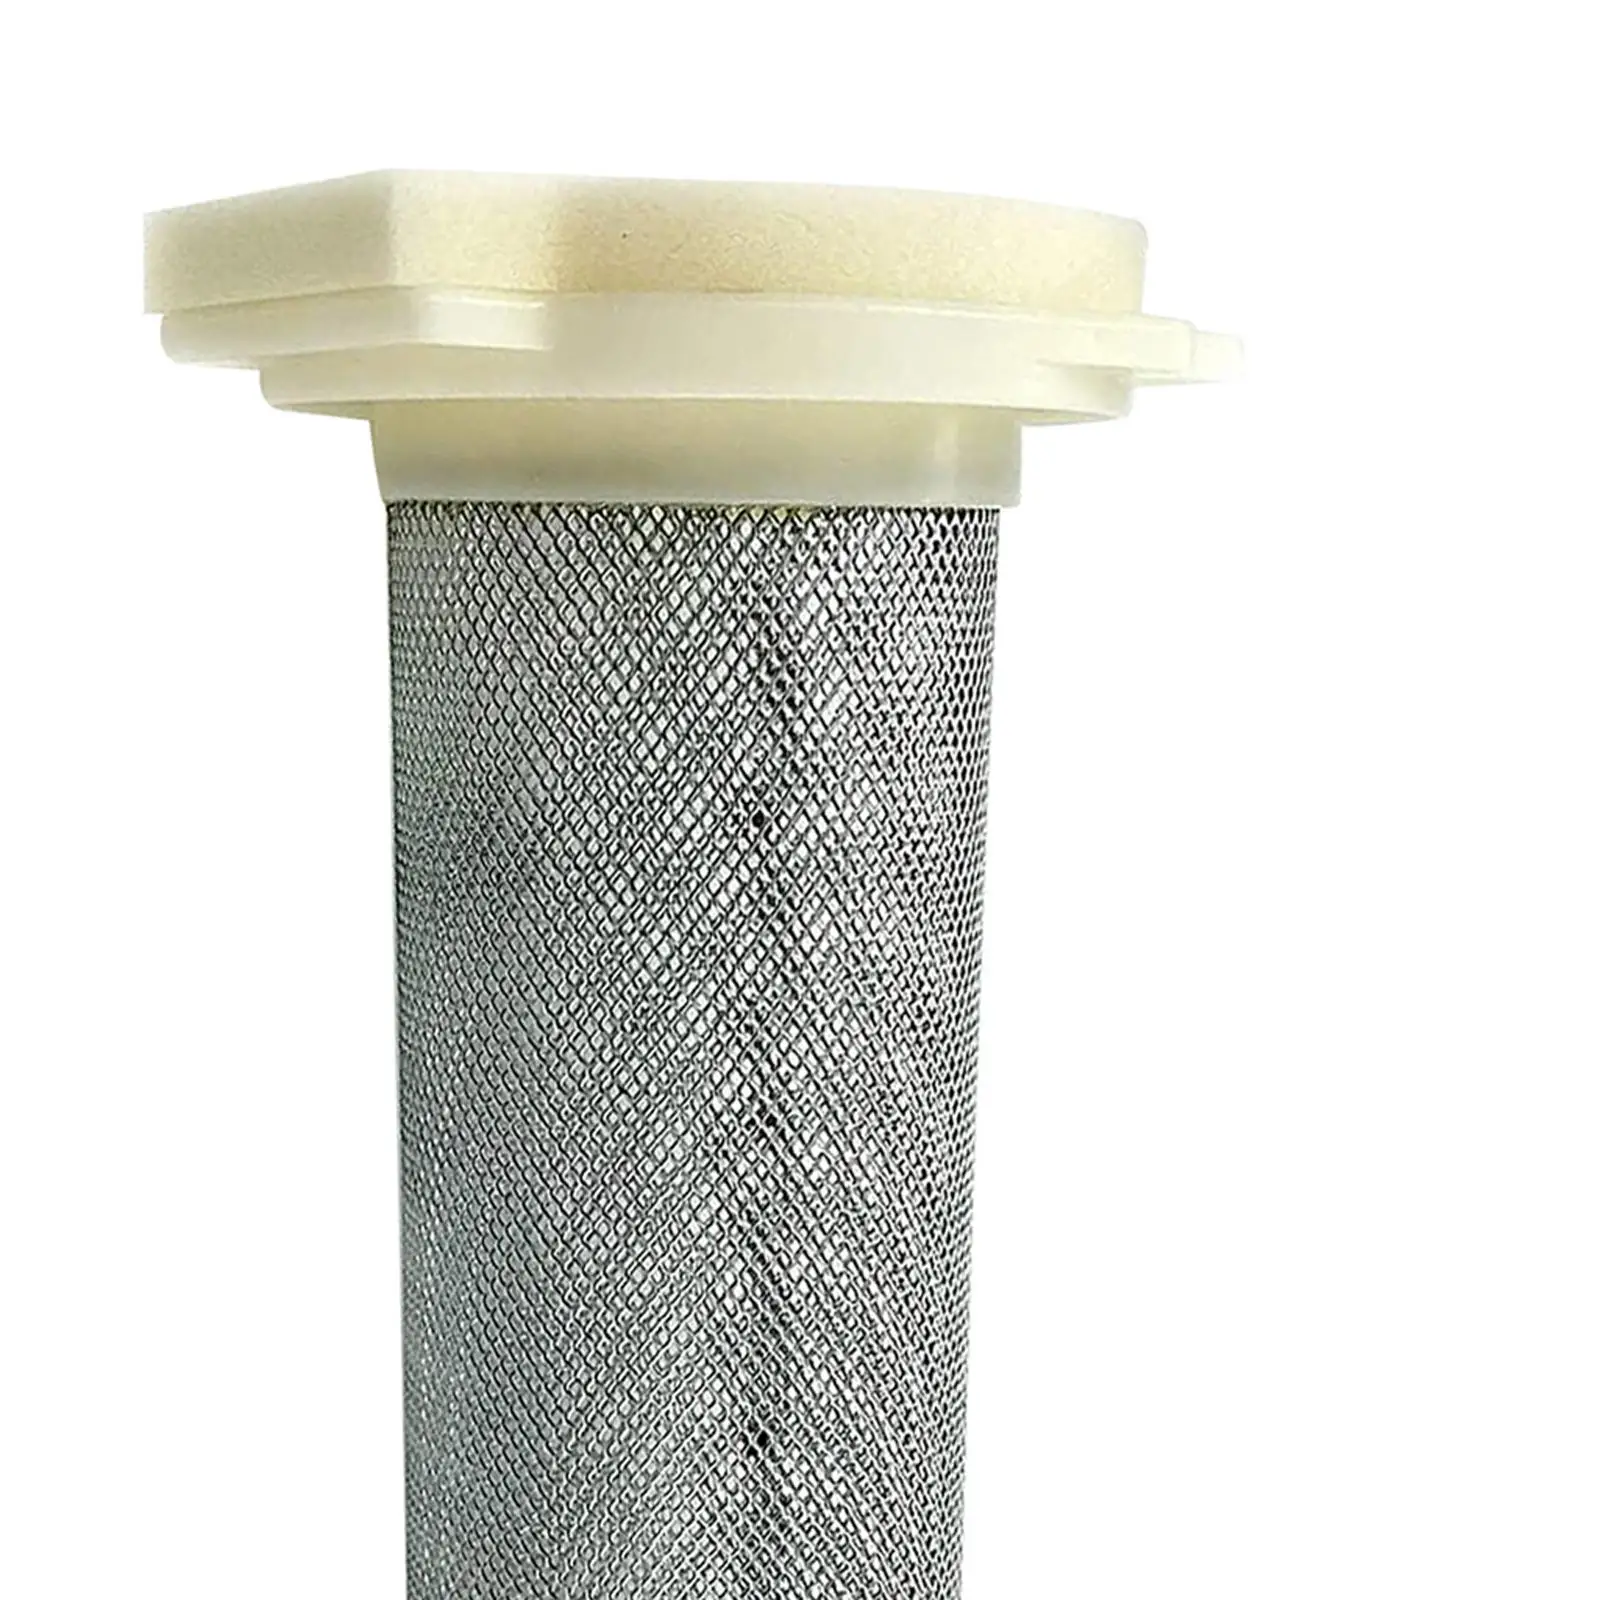 Air Filter Cage 1Uy-14458-01-00 for   350 Replaces Accessories